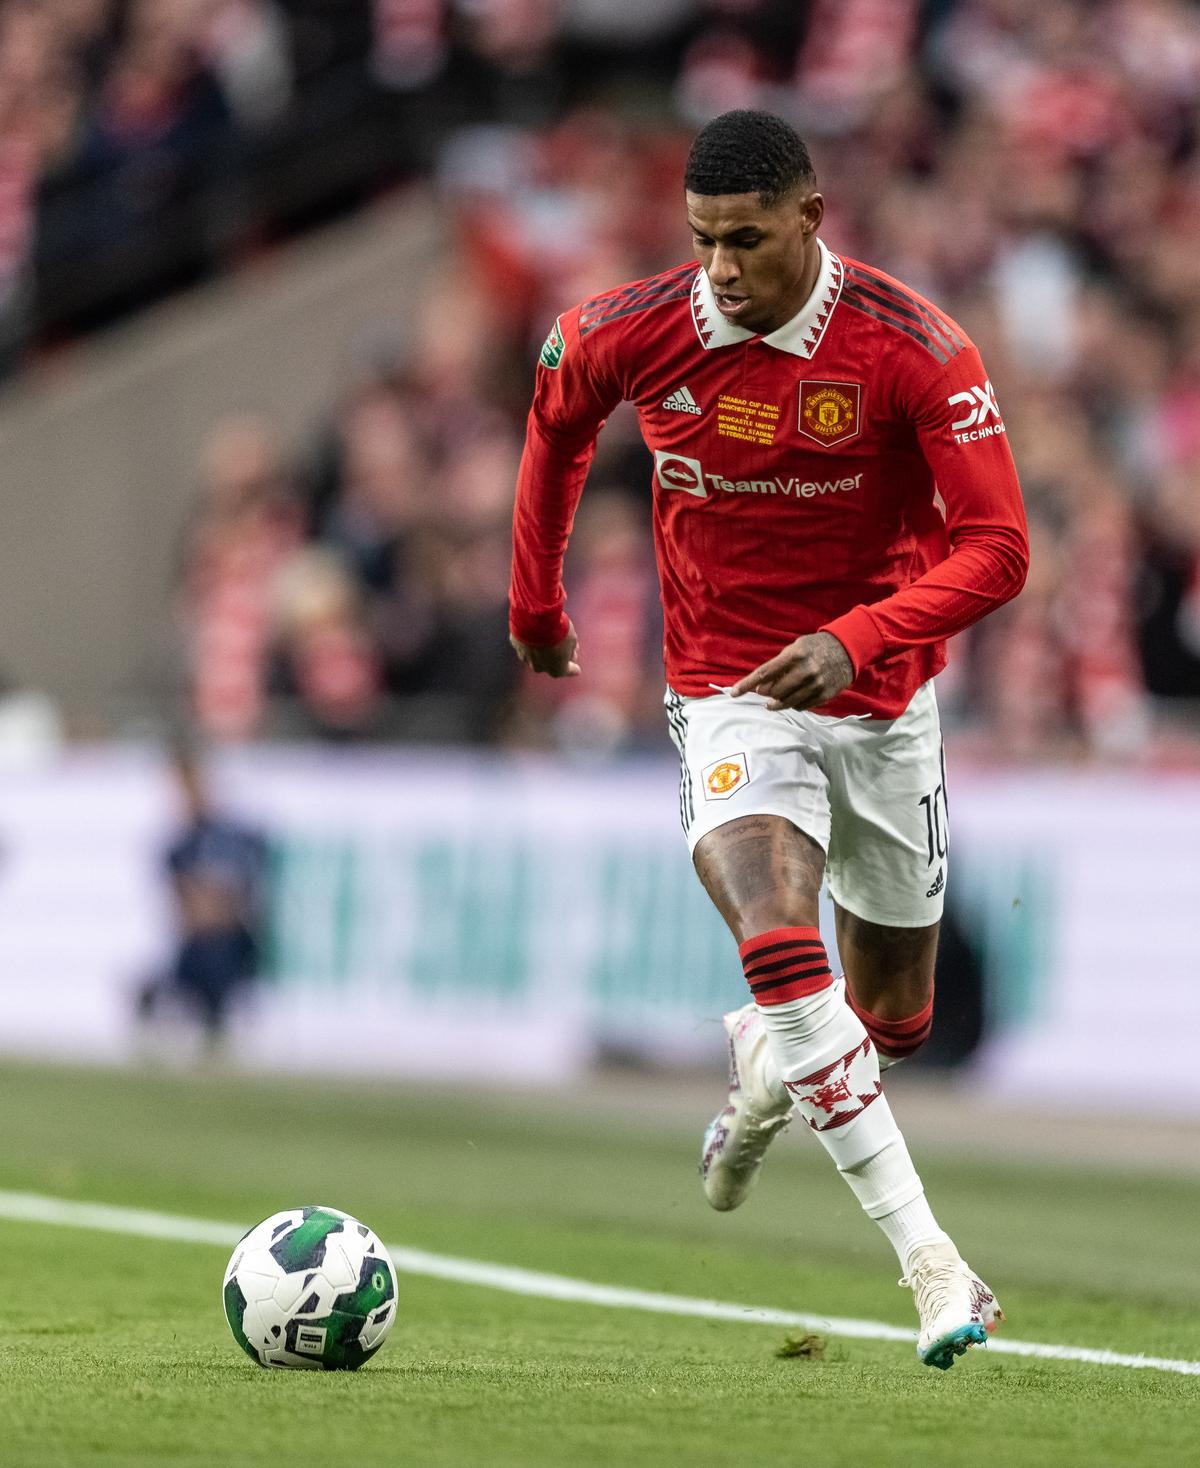 Coming to fruition: Rashford has stepped out of Cristiano Ronaldo’s shadow and delivered on the promise he showed when he first burst onto the scene as a fresh-faced teenager. 